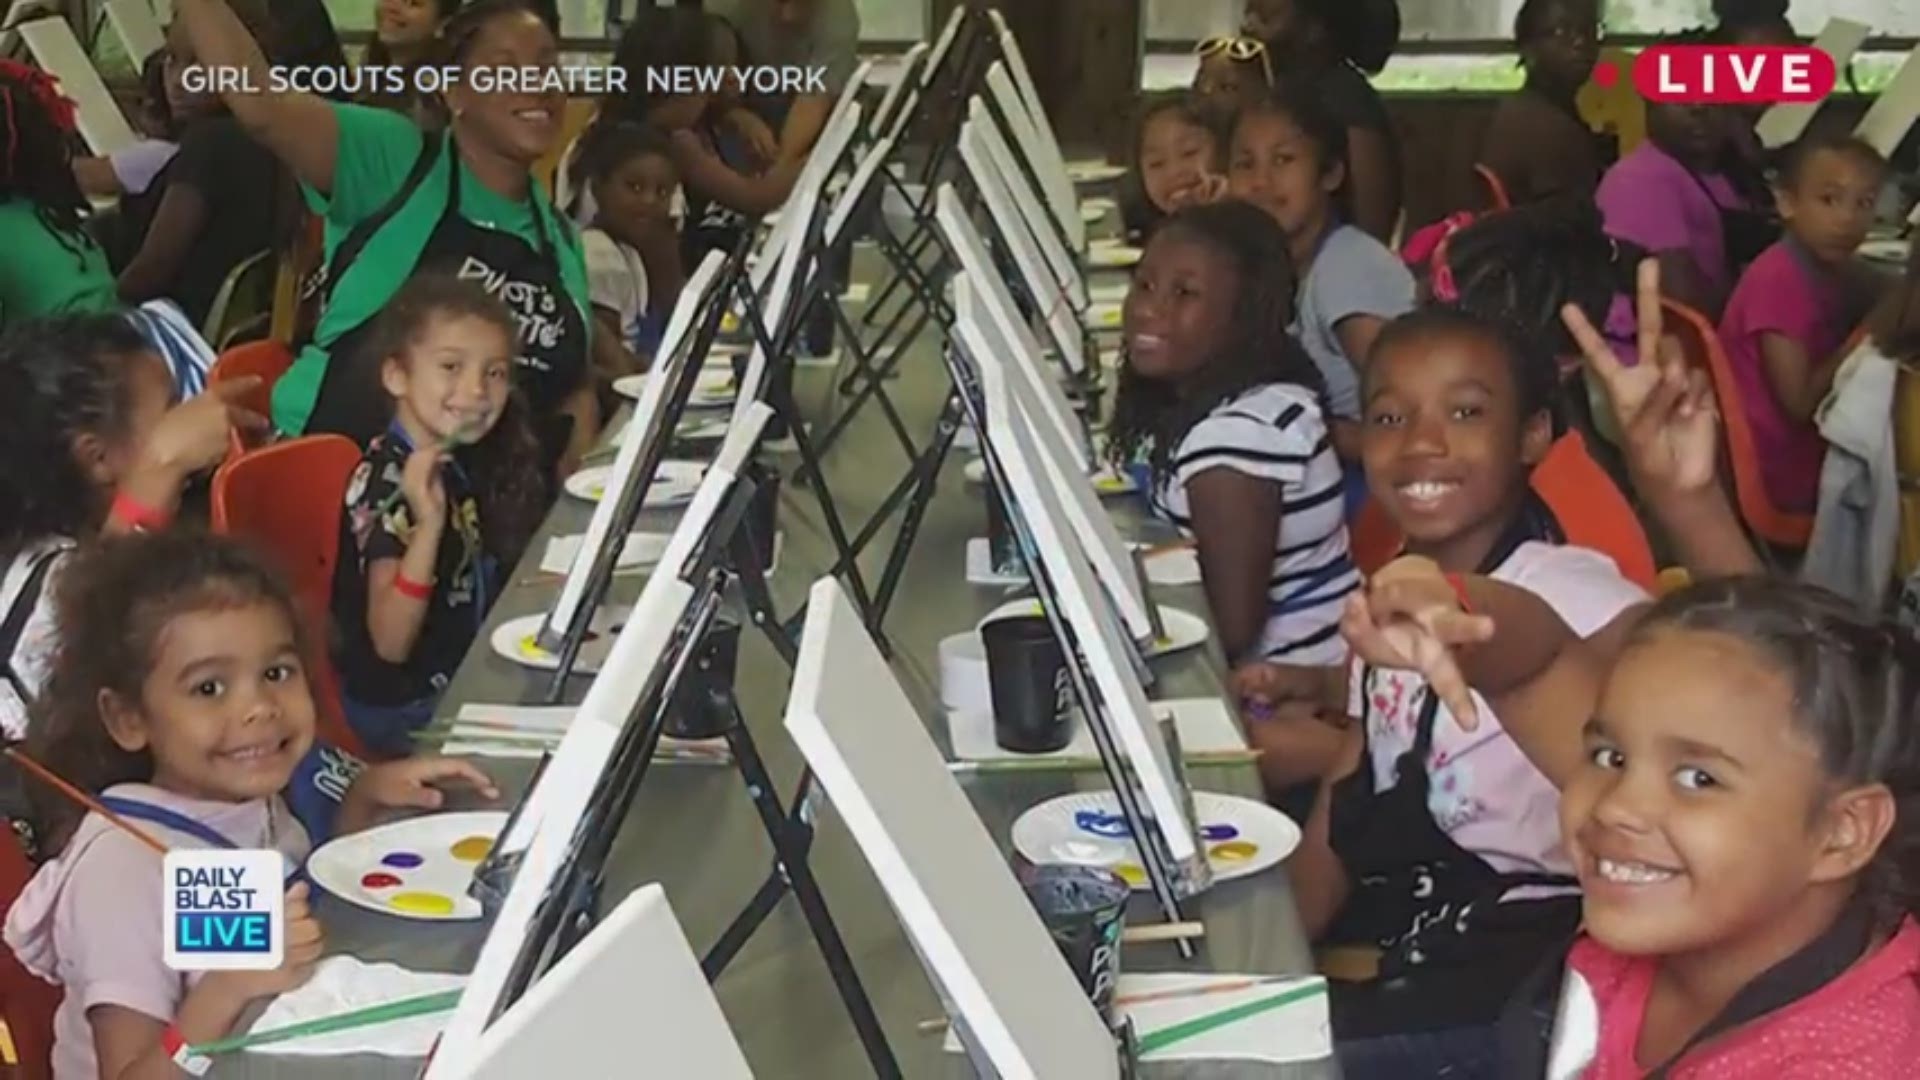 The members of Girl Scout troop 6000 are proving that childhood doesn't depend on a home. The New York City troop was started in a homeless shelter when one of the mothers wanted to create a community for the young girls. Daily Blast LIVE co-host Sam Scha